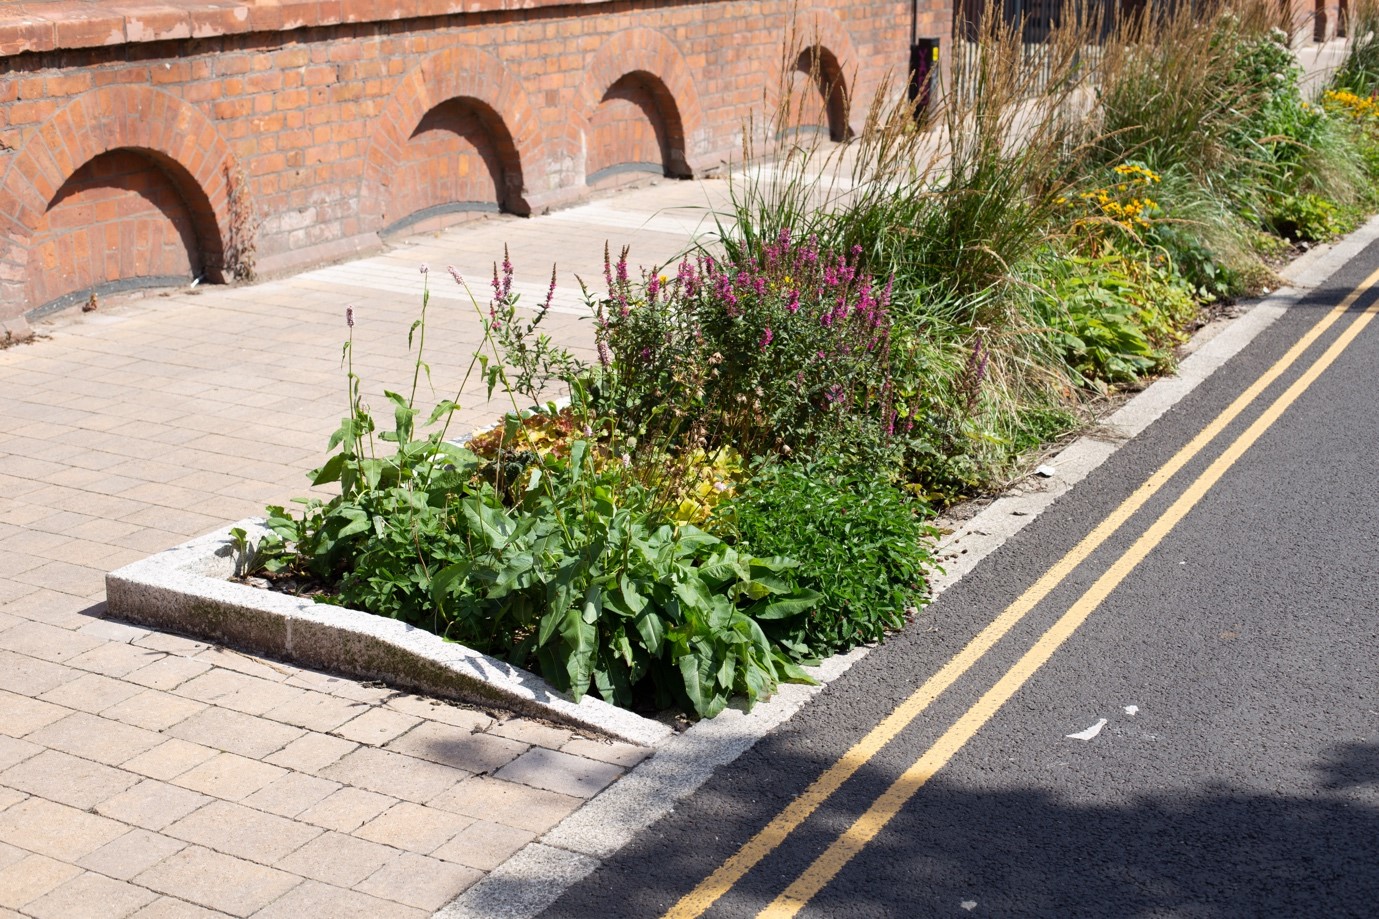 Main image: Roadside sustainable drainage systems in Salford; credit: Shutterstock